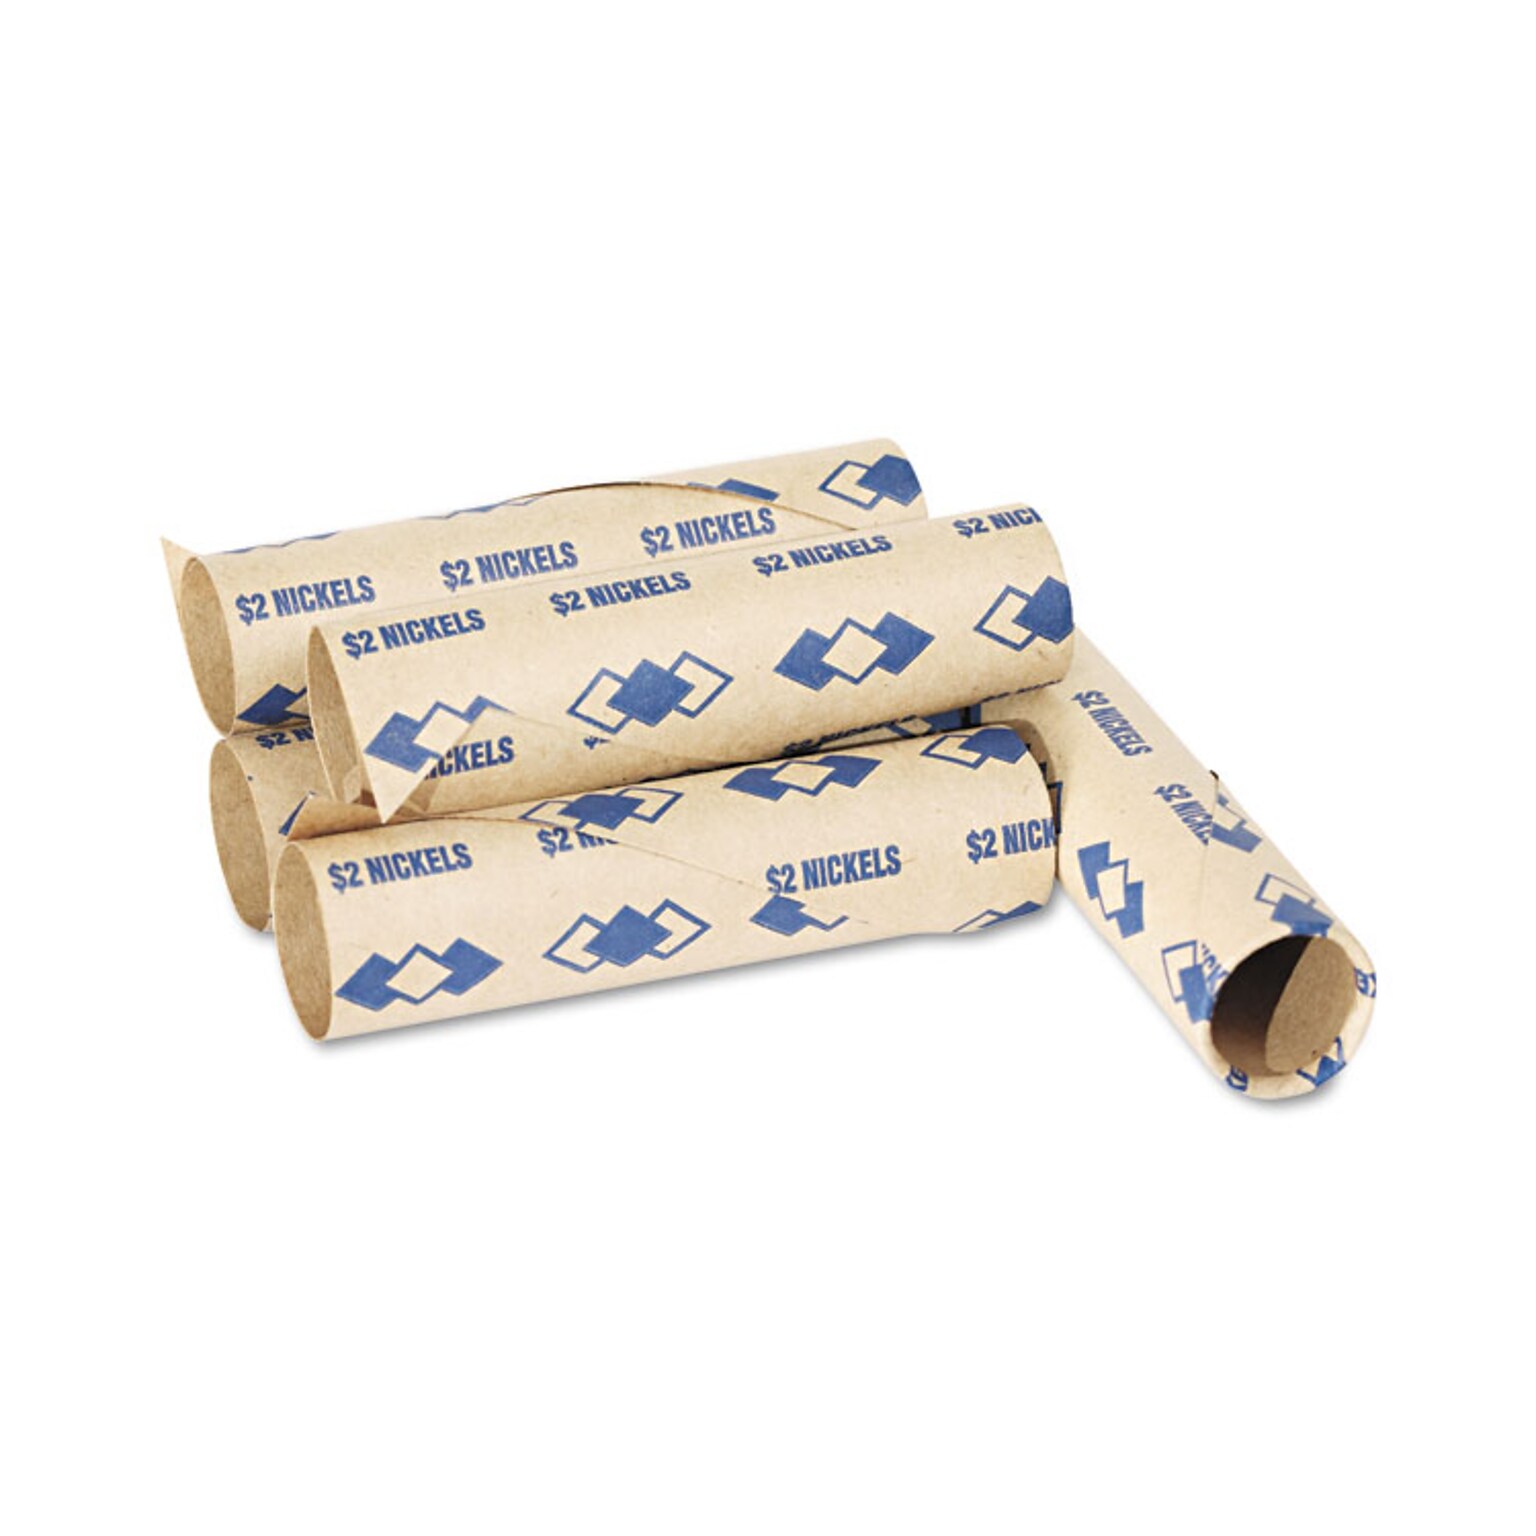 PM Company Pre-formed Tubular Cartridge Paper Nickel Wrappers, Blue, 1,000/Box (65070)